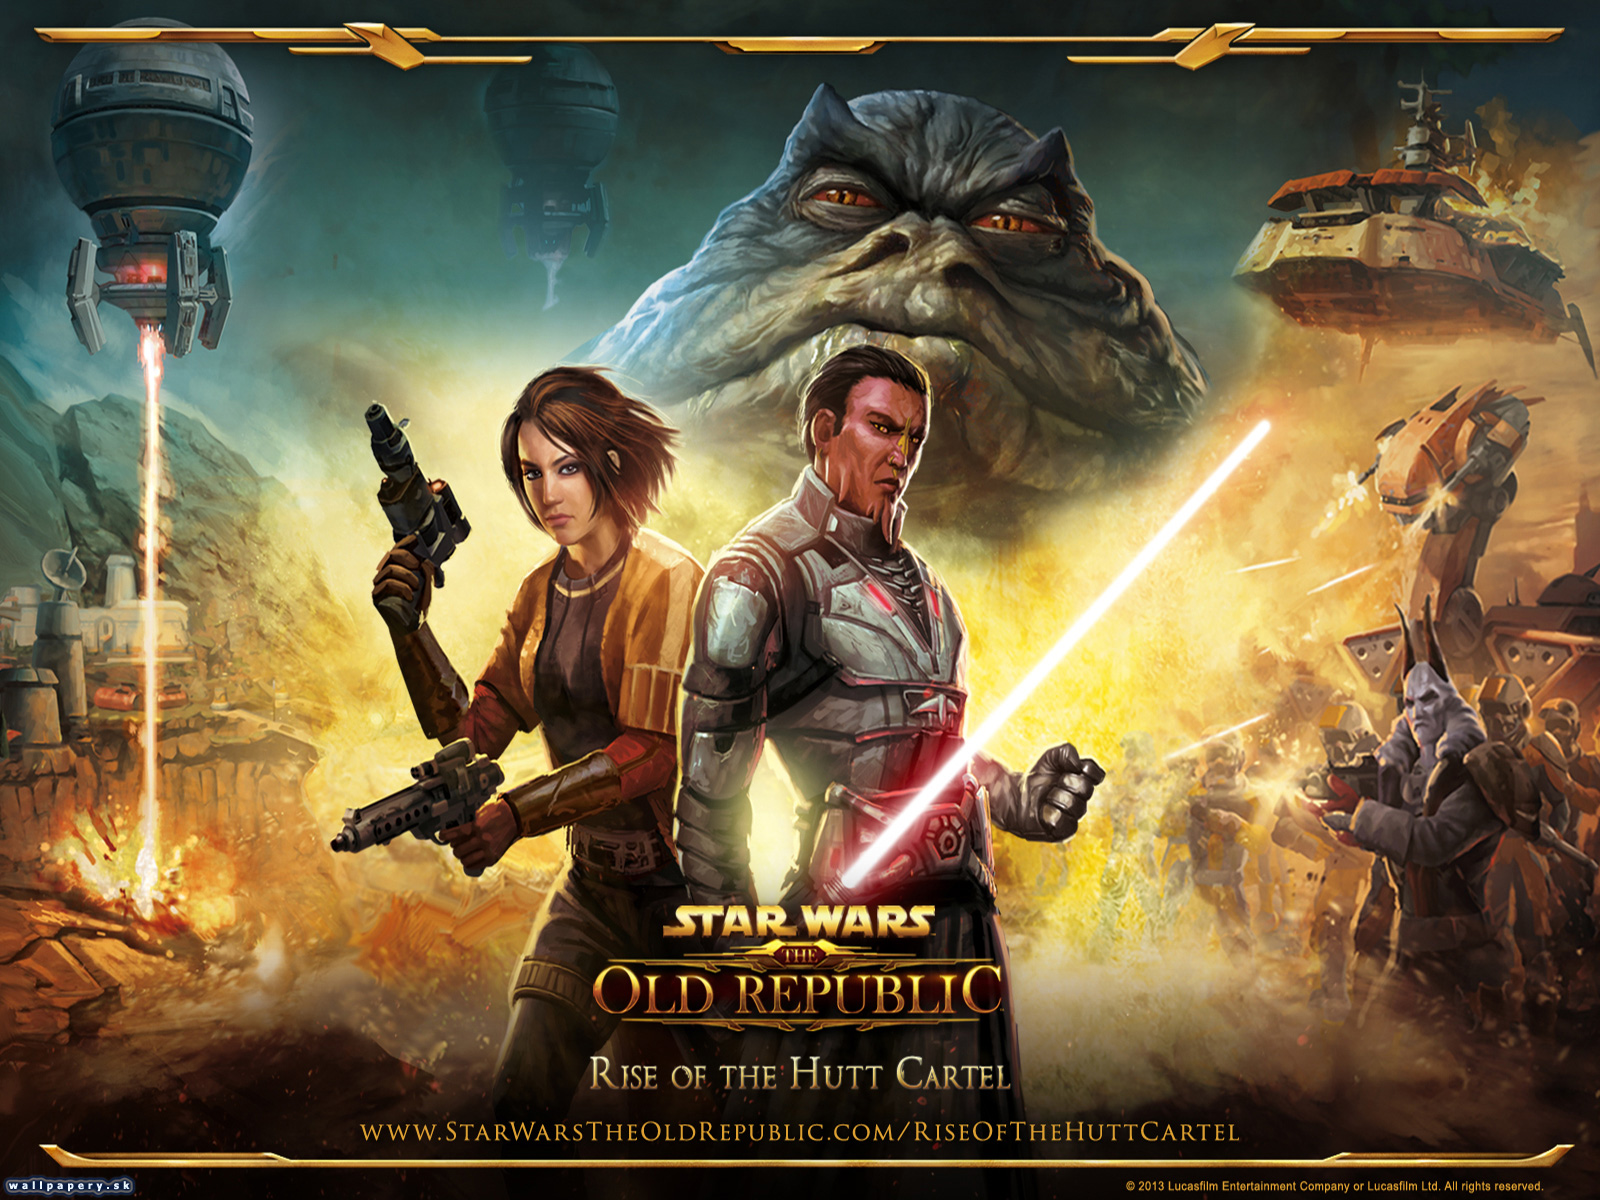 Star Wars: The Old Republic - Rise of the Hutt Cartel - wallpaper 1